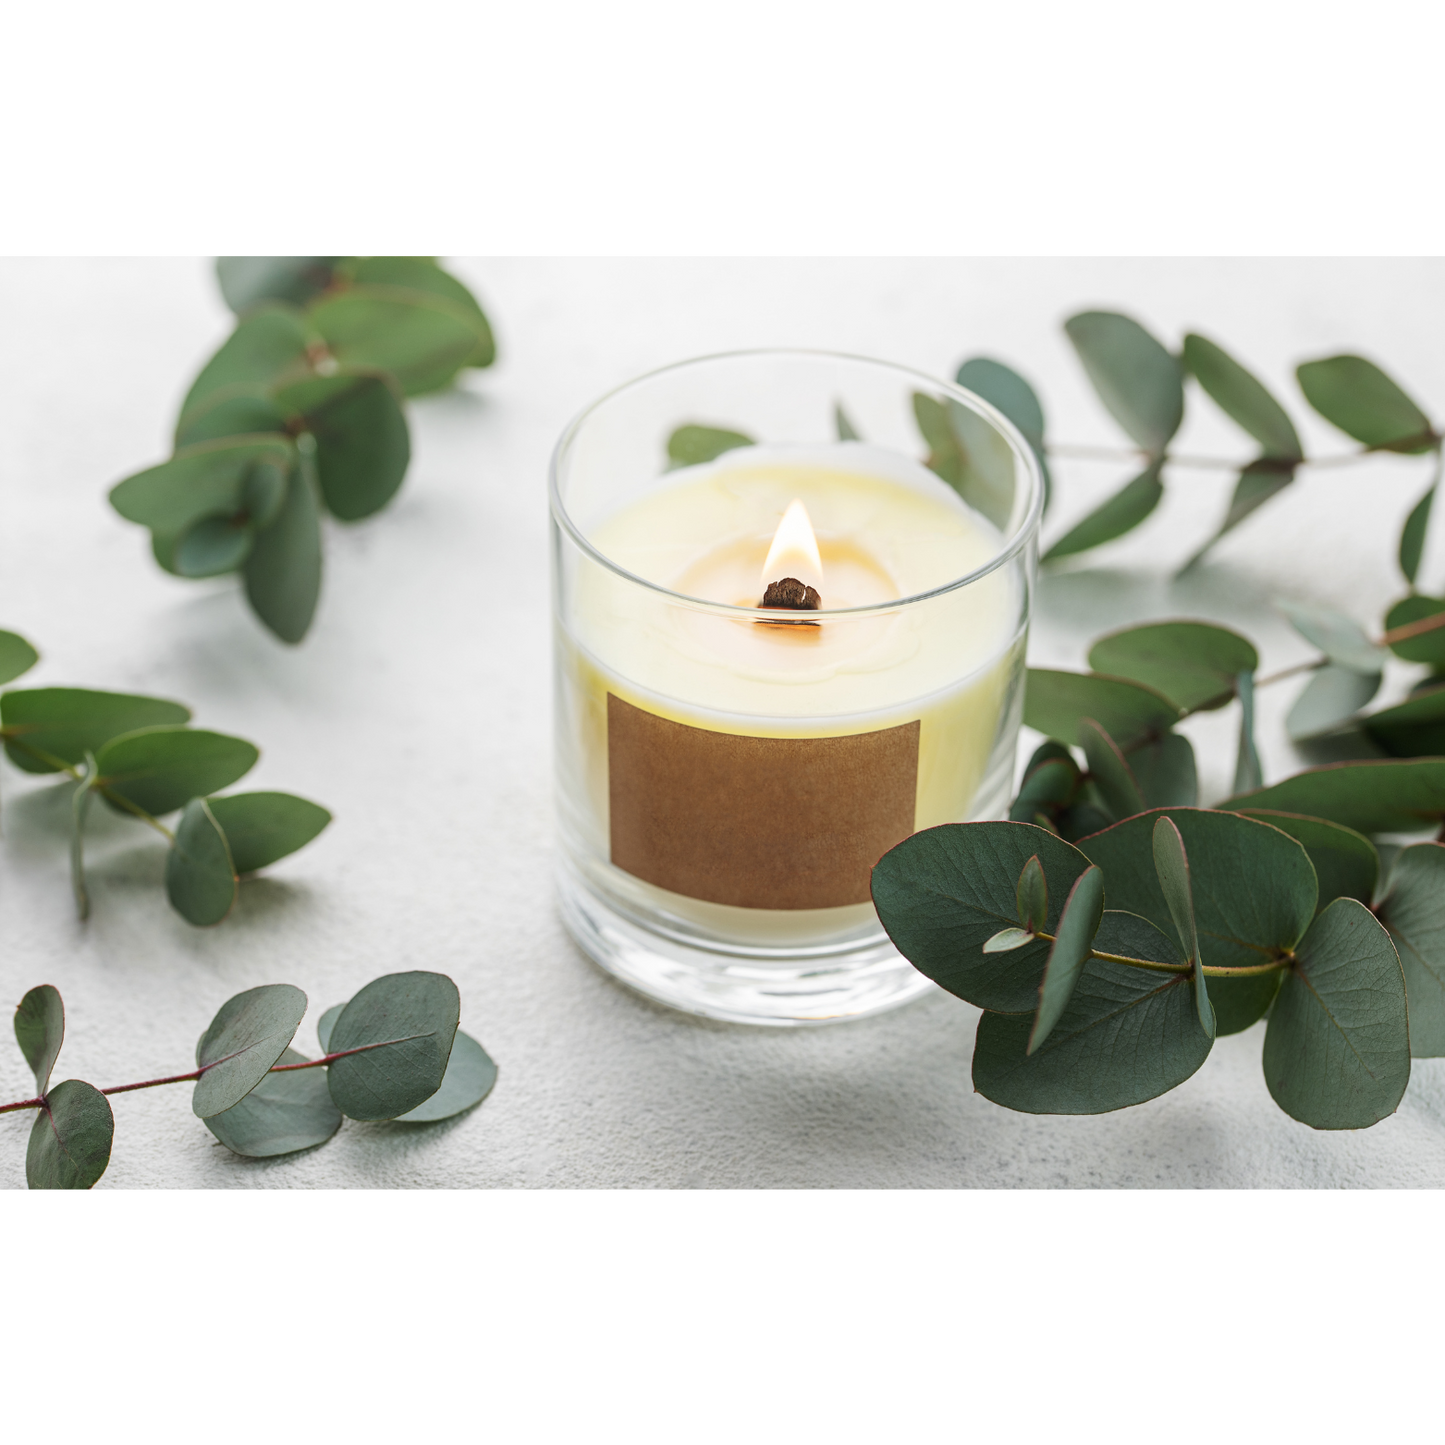 Eucalyptus Loose Leaf for Simmer Pots, Bath and Ritual to Unveil the Spirit Within